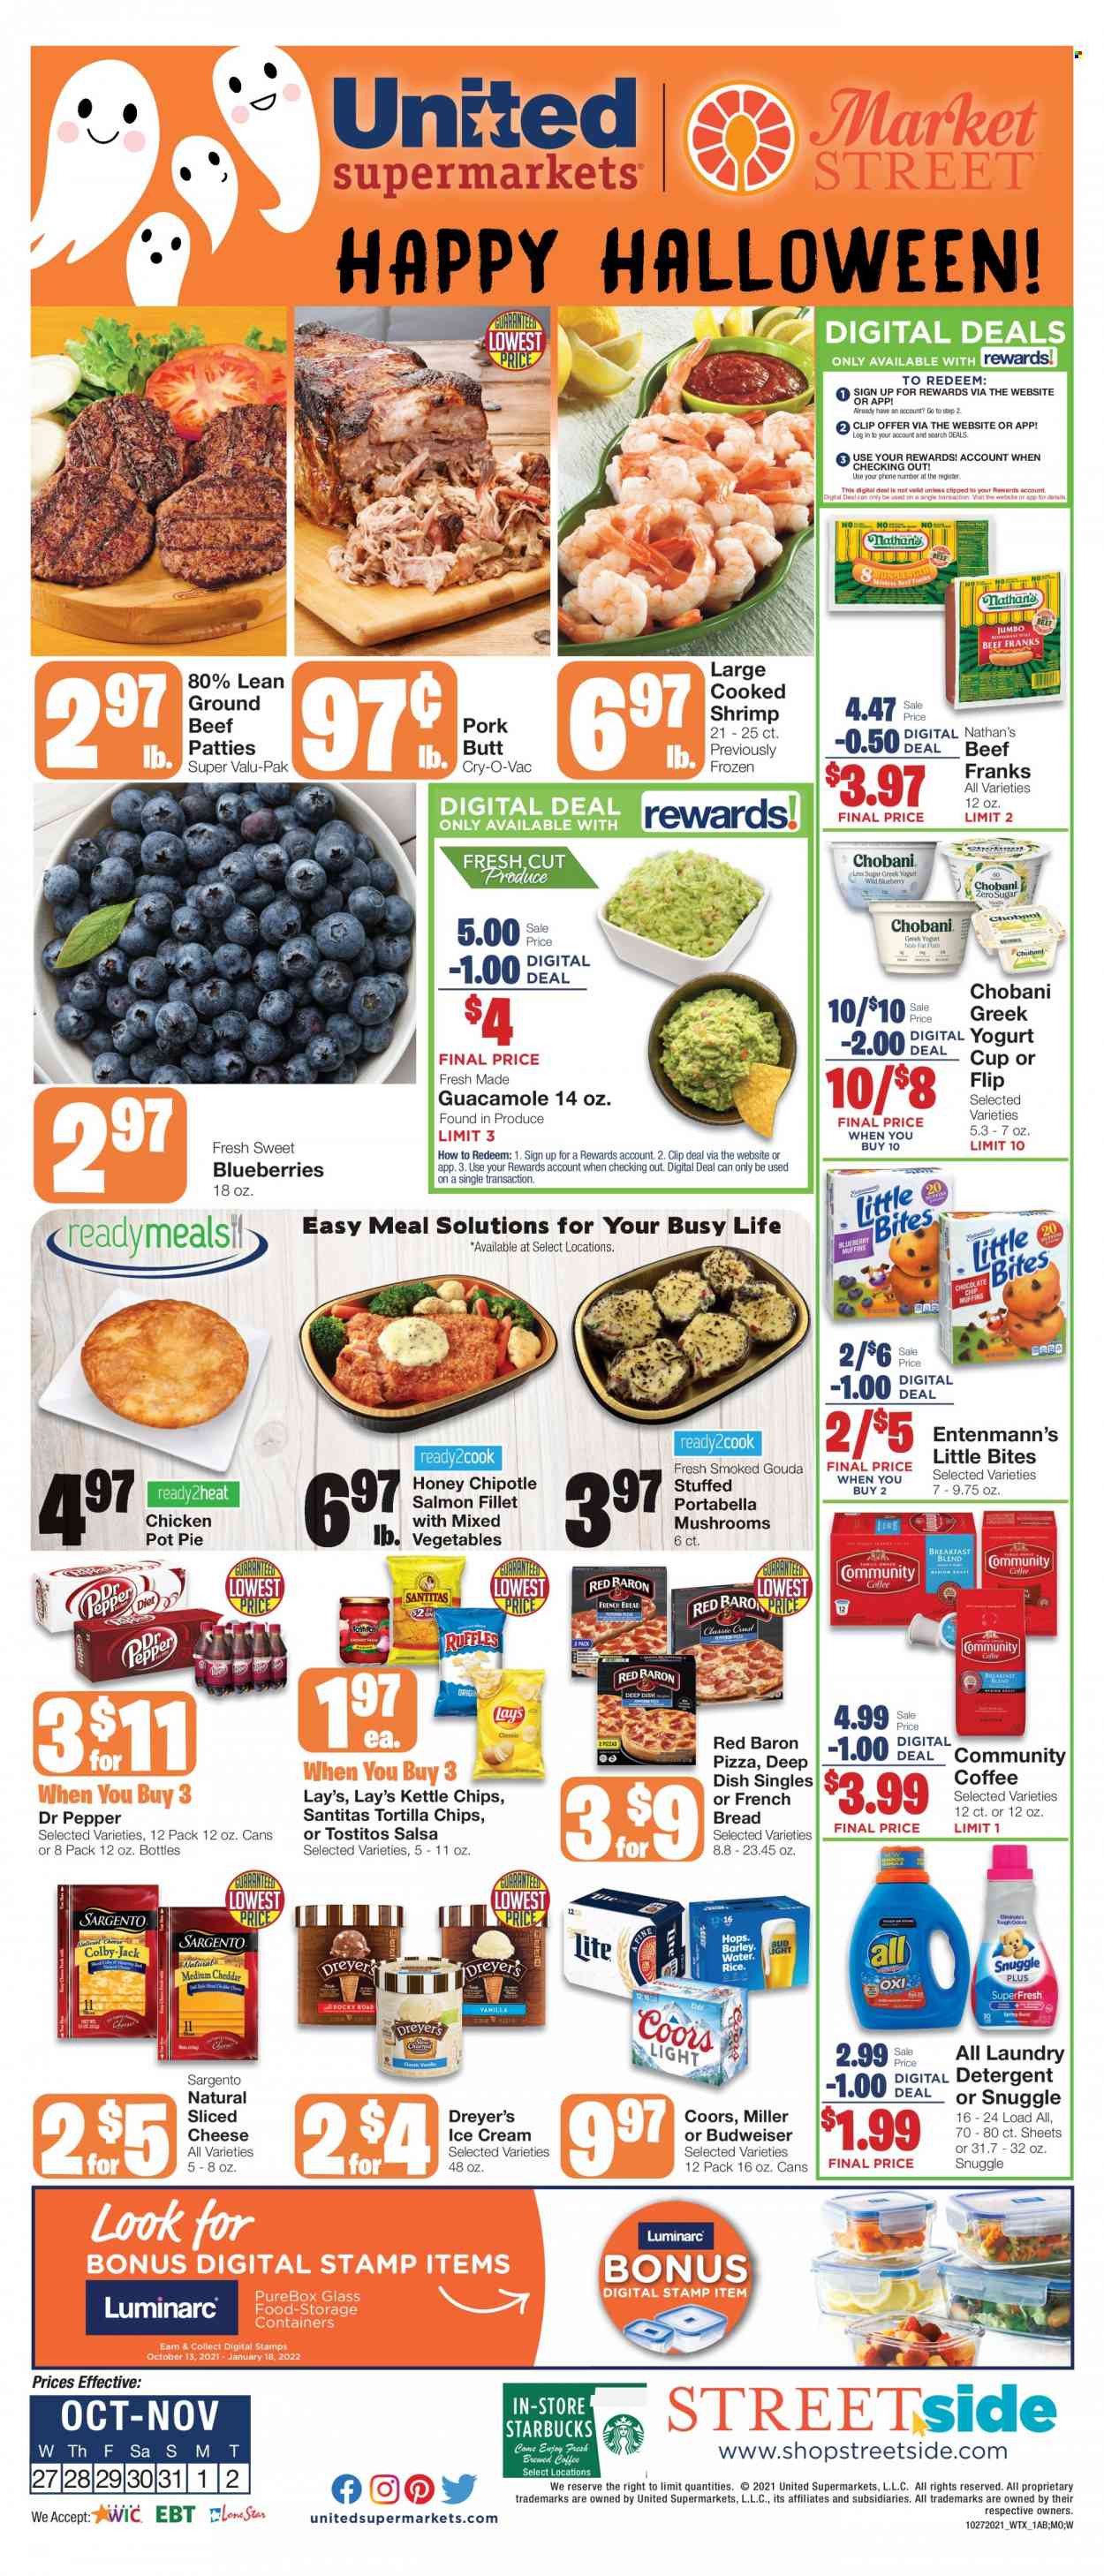 thumbnail - United Supermarkets Flyer - 10/27/2021 - 11/02/2021 - Sales products - bread, pie, french bread, pot pie, Entenmann's, blueberries, beef meat, ground beef, salmon, salmon fillet, shrimps, pizza, guacamole, gouda, sliced cheese, Sargento, yoghurt, Chobani, ice cream, mixed vegetables, Red Baron, Little Bites, tortilla chips, Lay’s, Tostitos, salsa, honey, Dr. Pepper, coffee, Starbucks, beer, Miller, detergent, Snuggle, laundry detergent, pot, cup, storage box, Budweiser, Coors. Page 1.